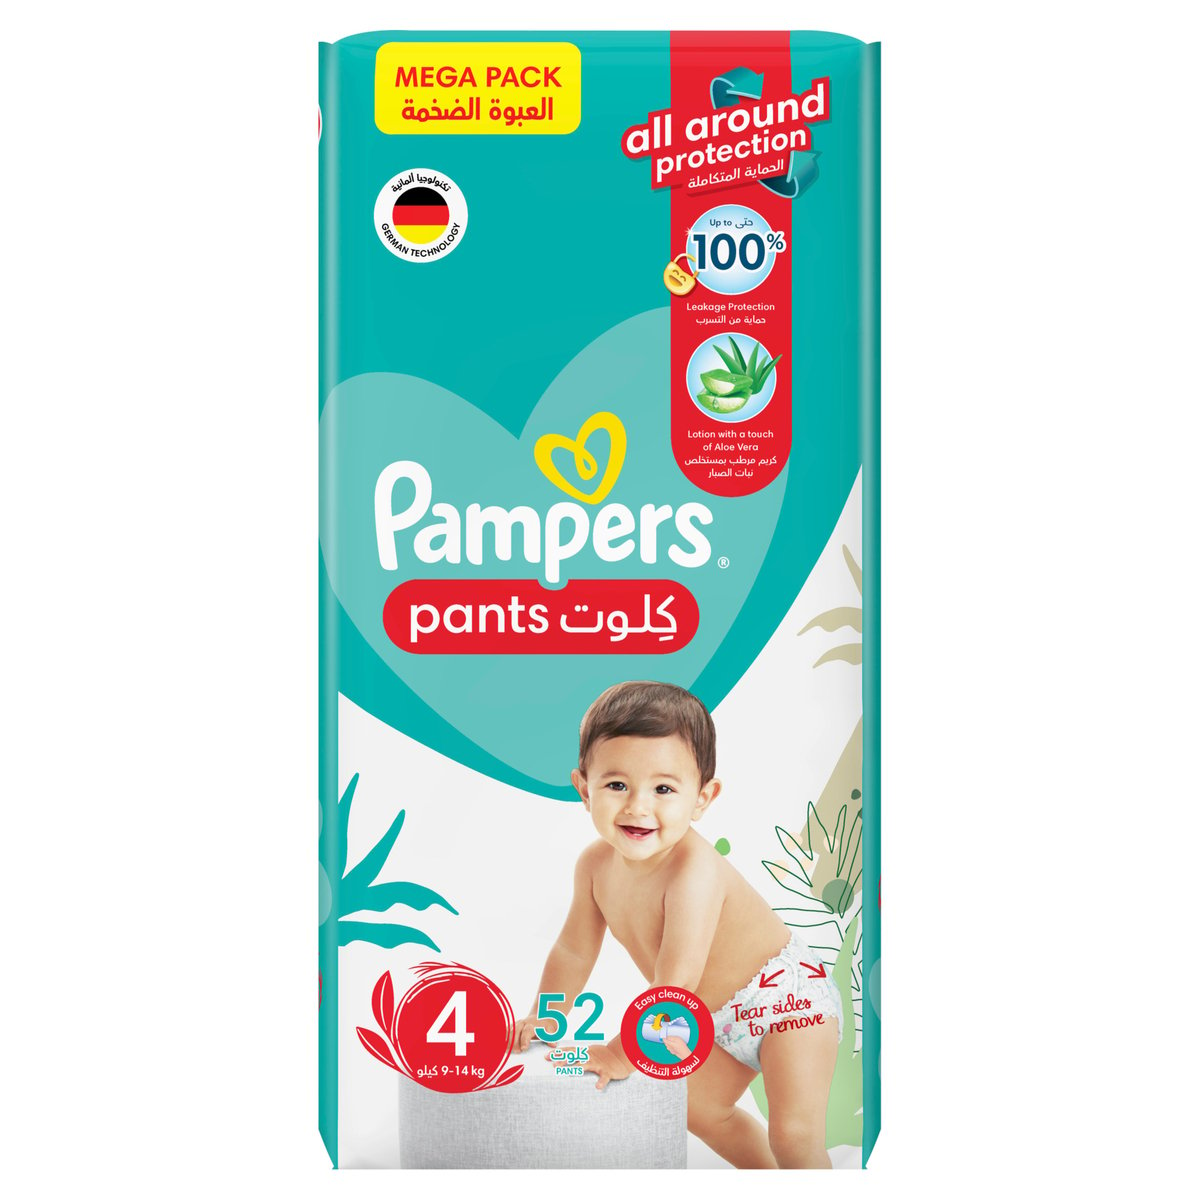 Pampers Baby-Dry Pants Diapers with Aloe Vera Lotion, 360 Fit & up to 100% Leakproof, Size 4 9-14kg Mega Pack, 52 Count